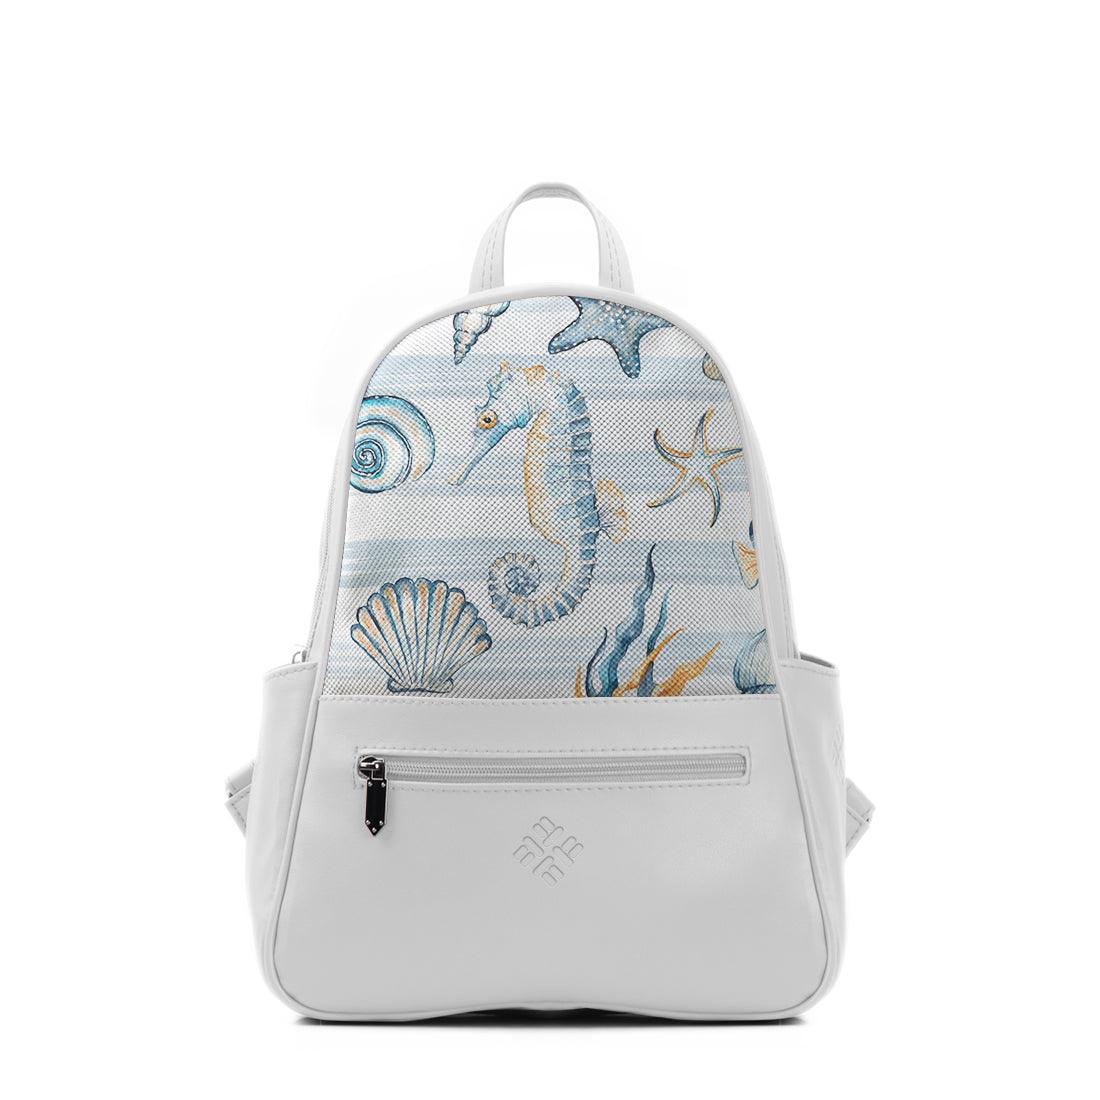 White Vivid Backpack Under Water - CANVAEGYPT